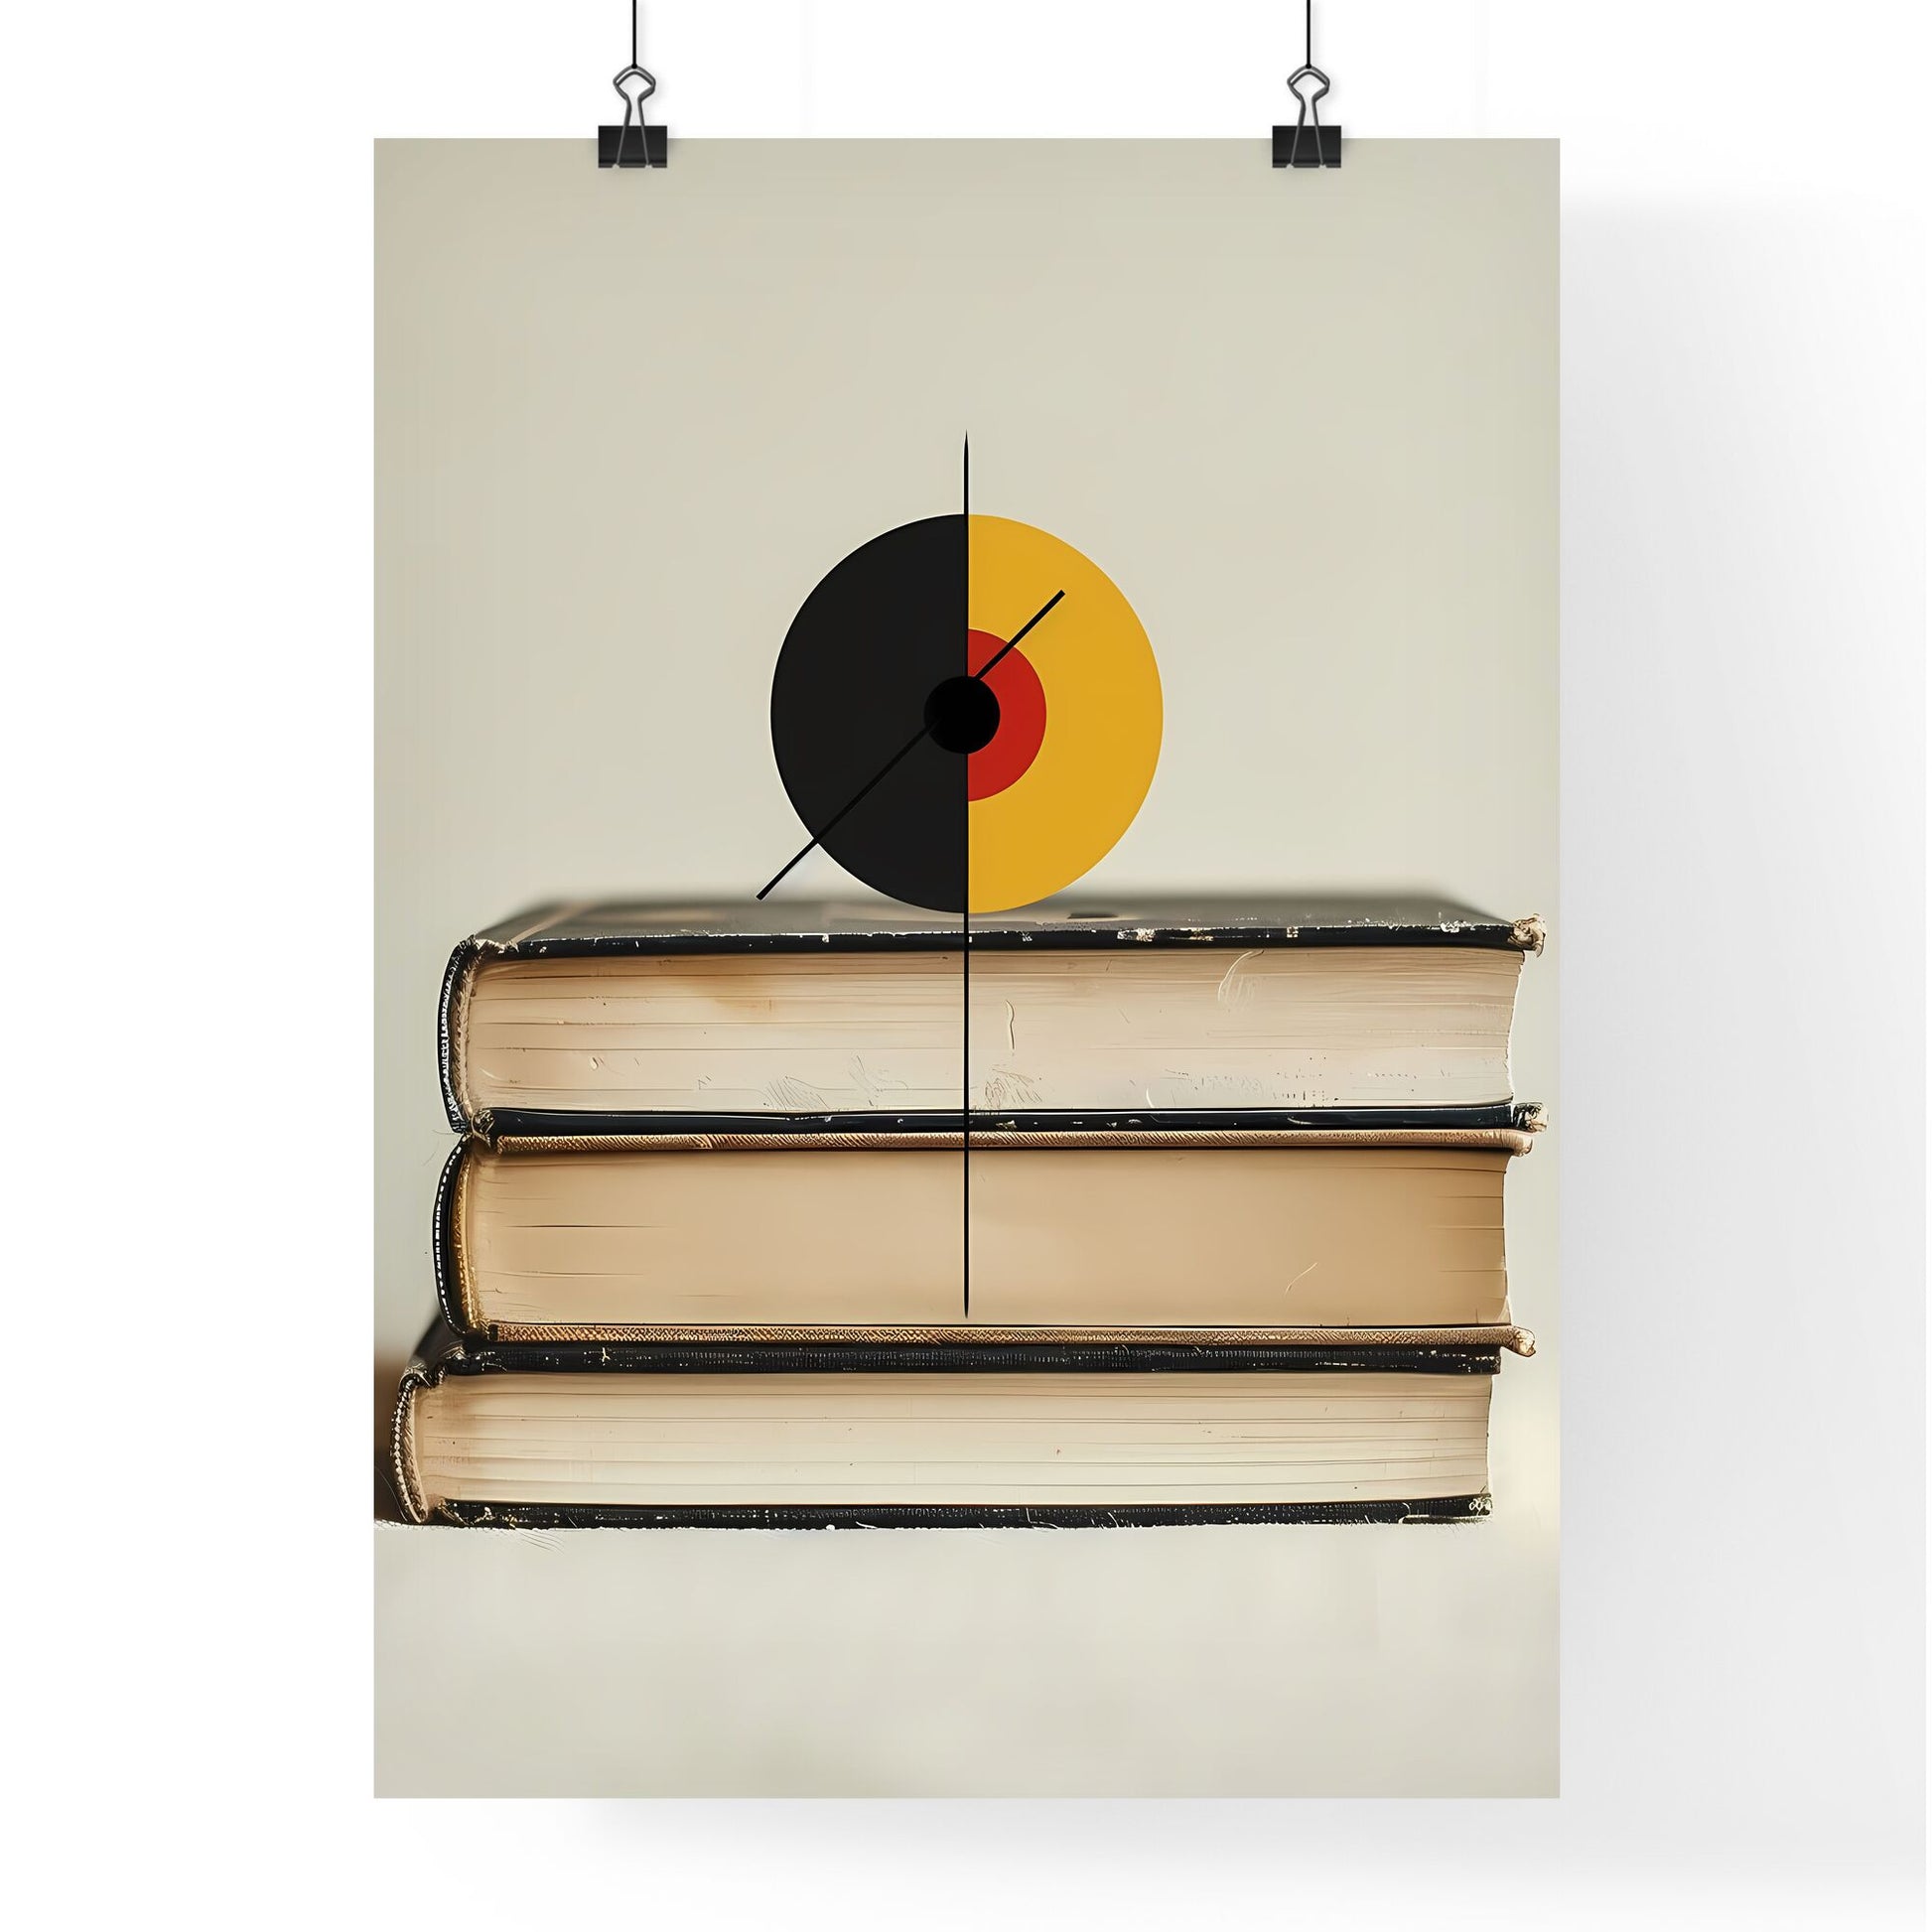 Minimalist Bauhaus Book Cover Art: Japanese-Style Stack of Books with Black and Yellow Circle Default Title